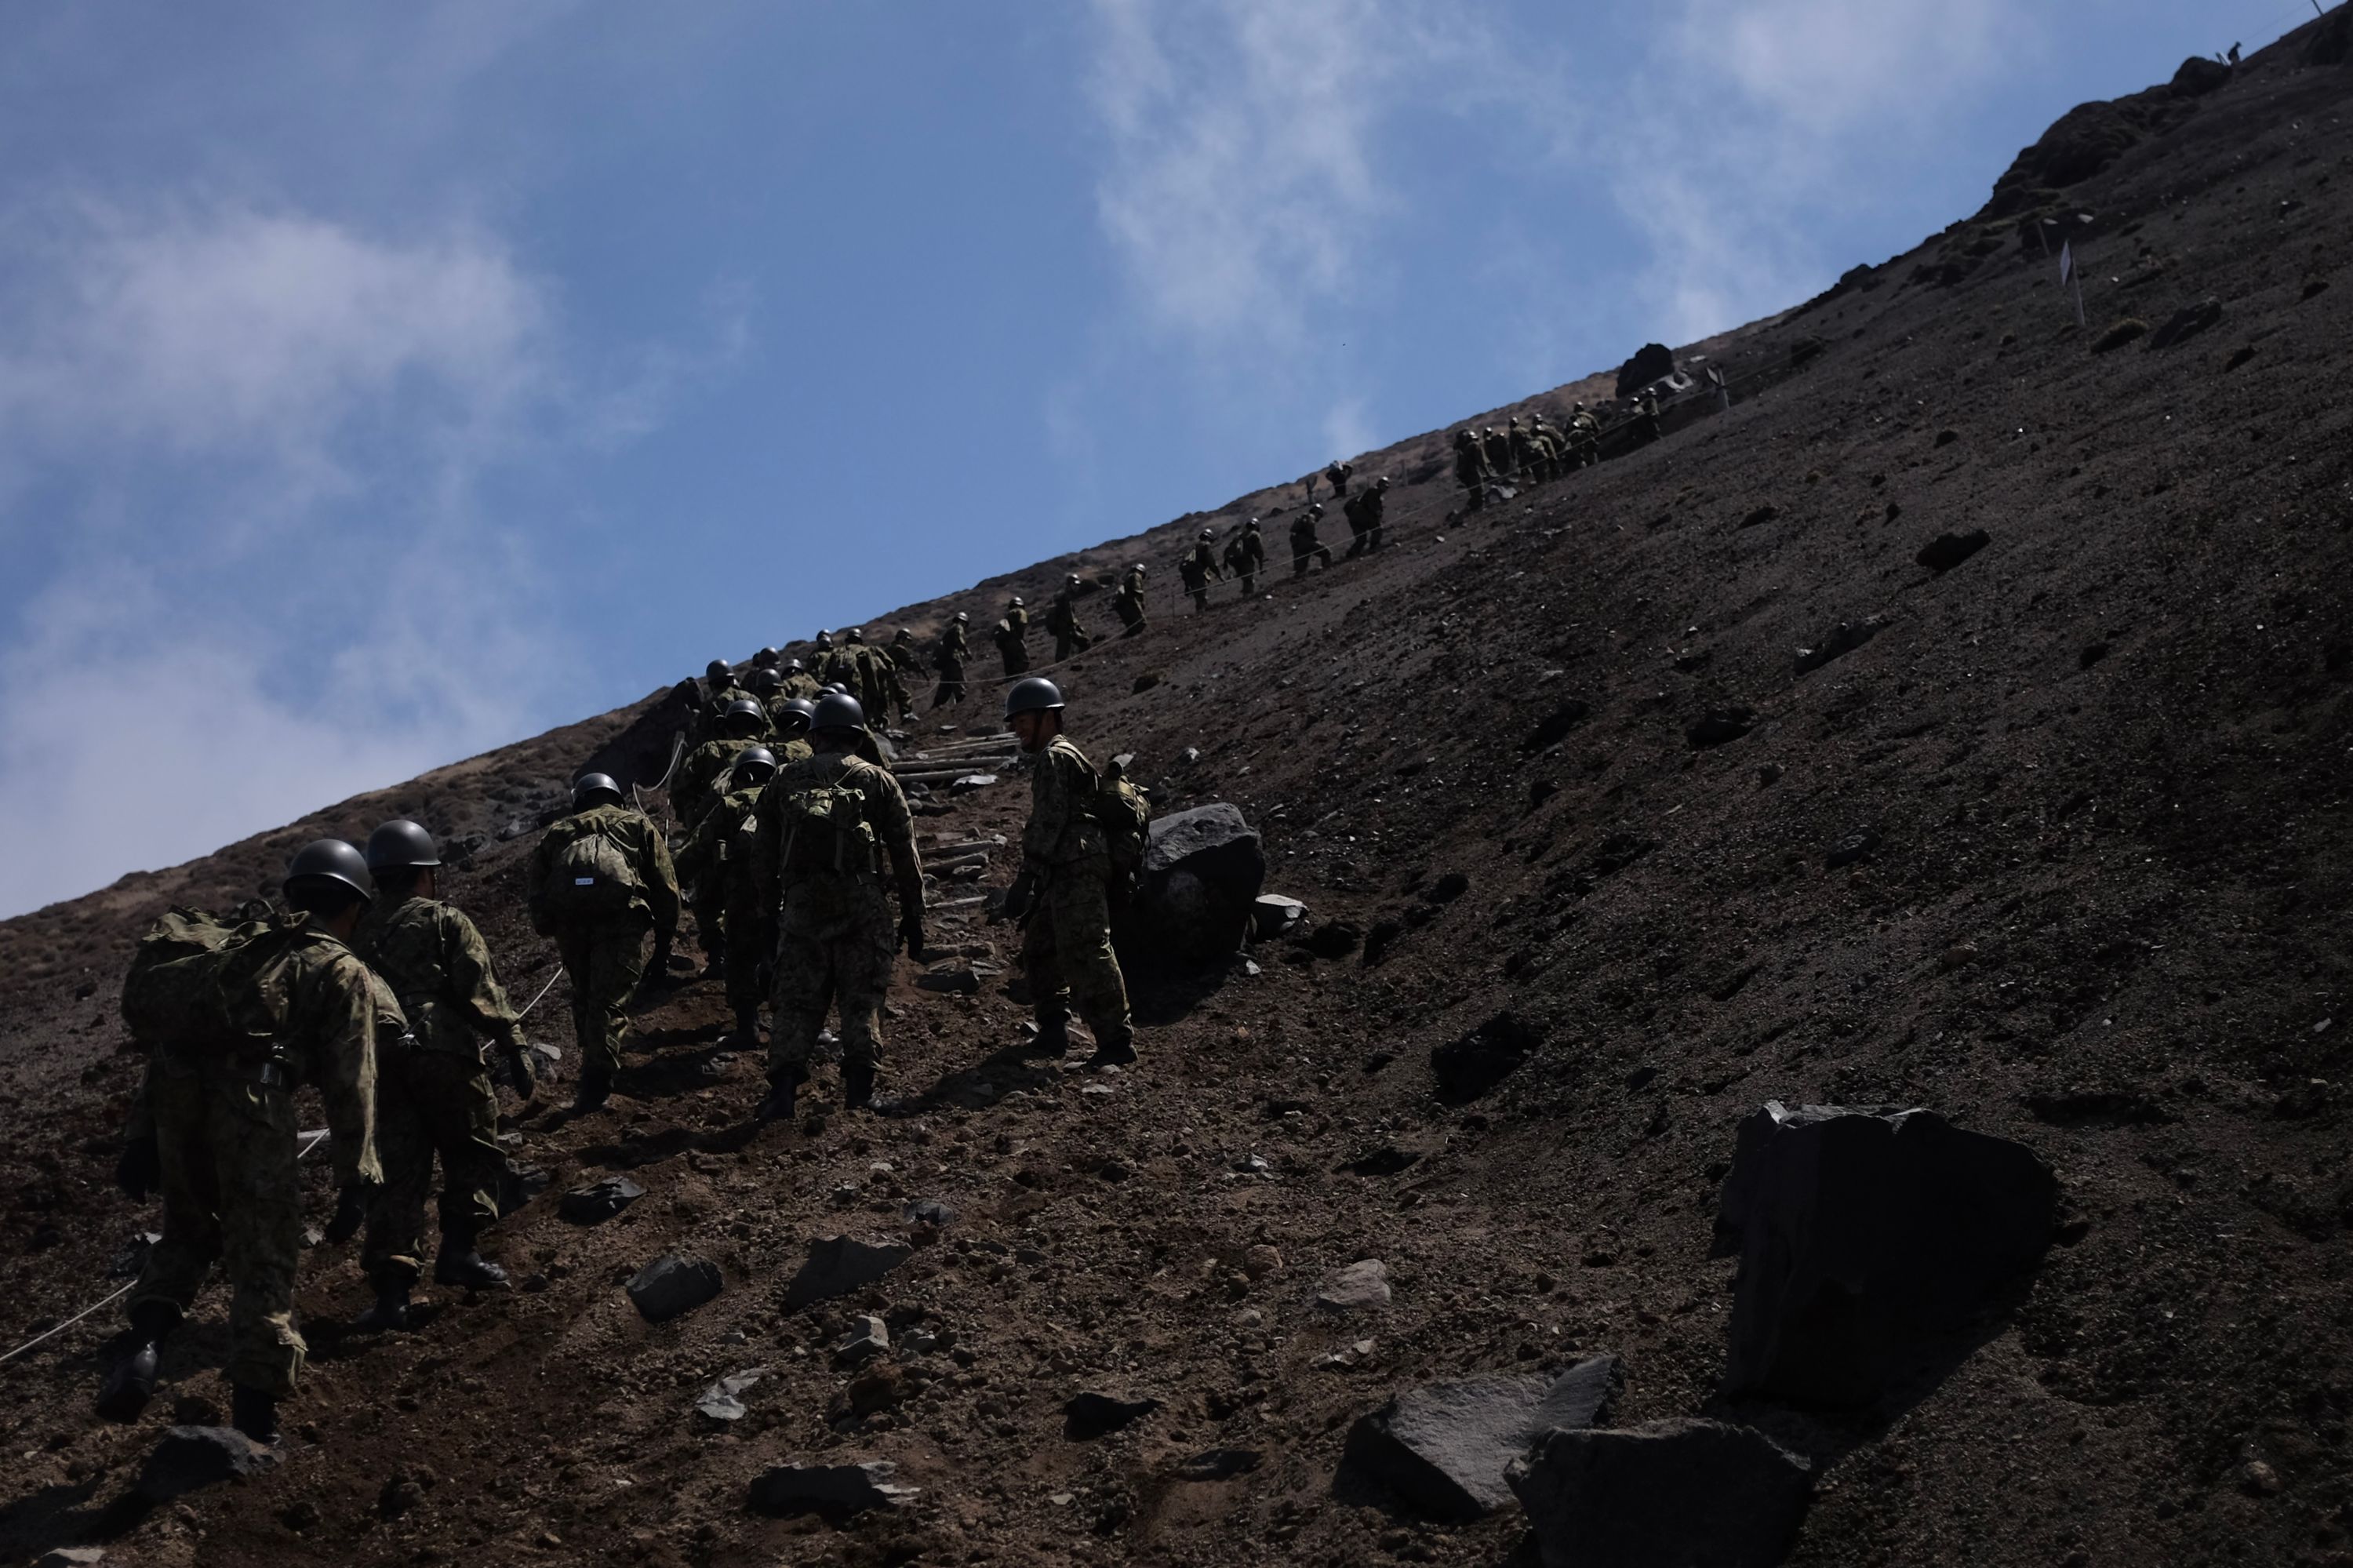 The soldiers march away from the camera, up the mountain.